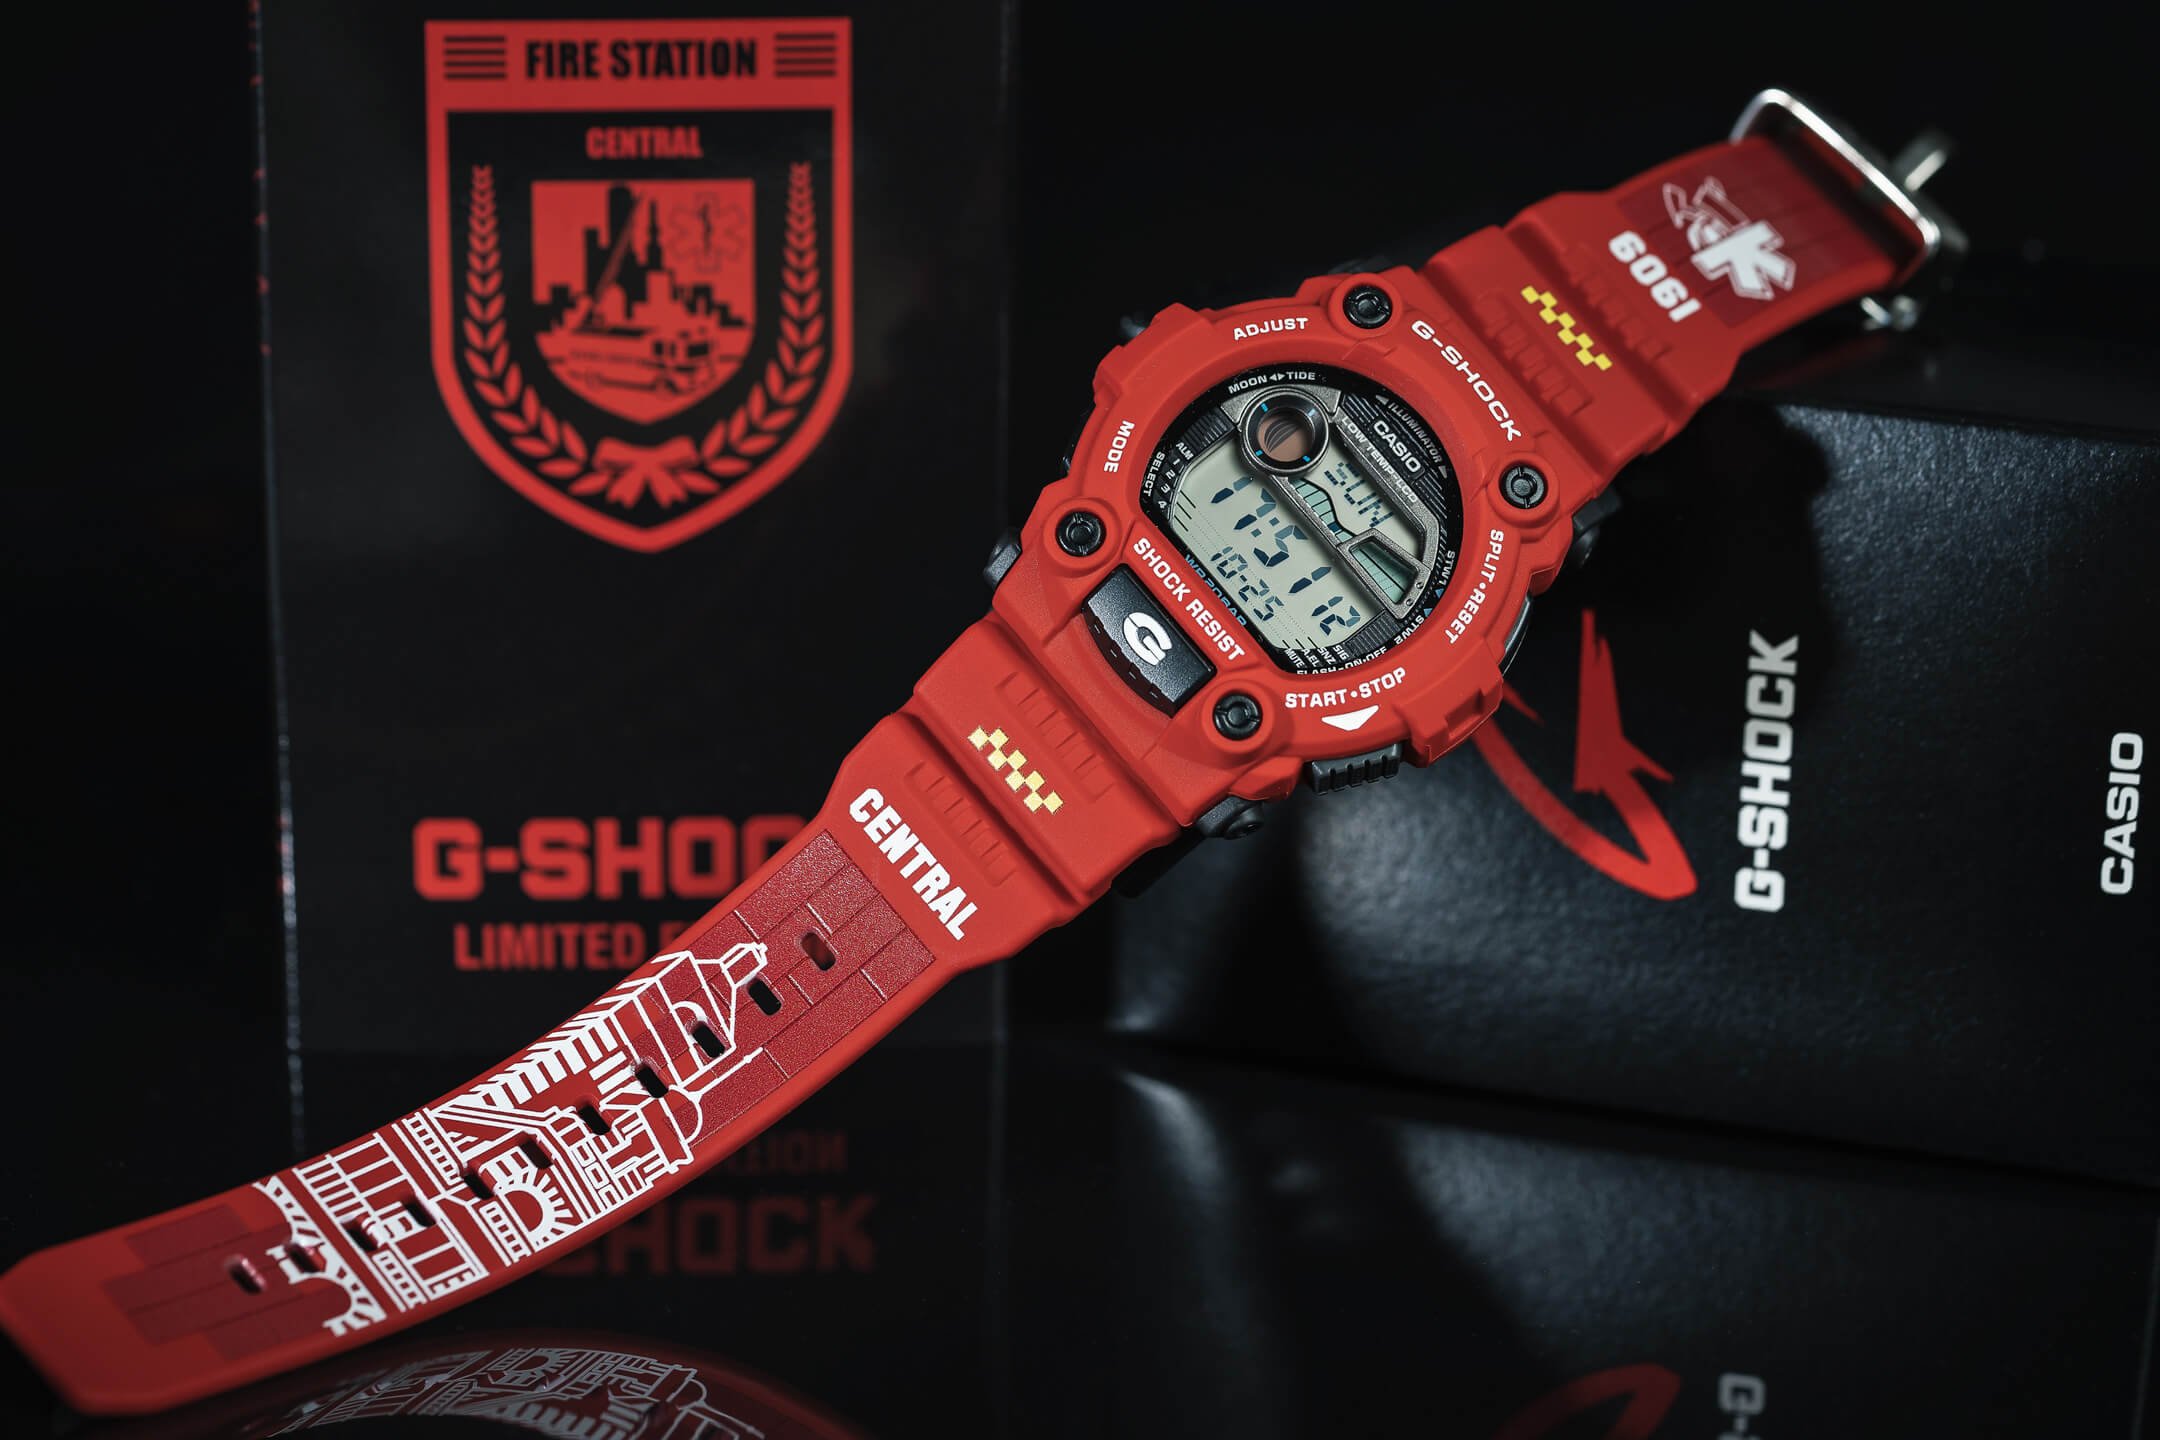 Central Fire Station x G-Shock G-7900 for 111st Anniversary